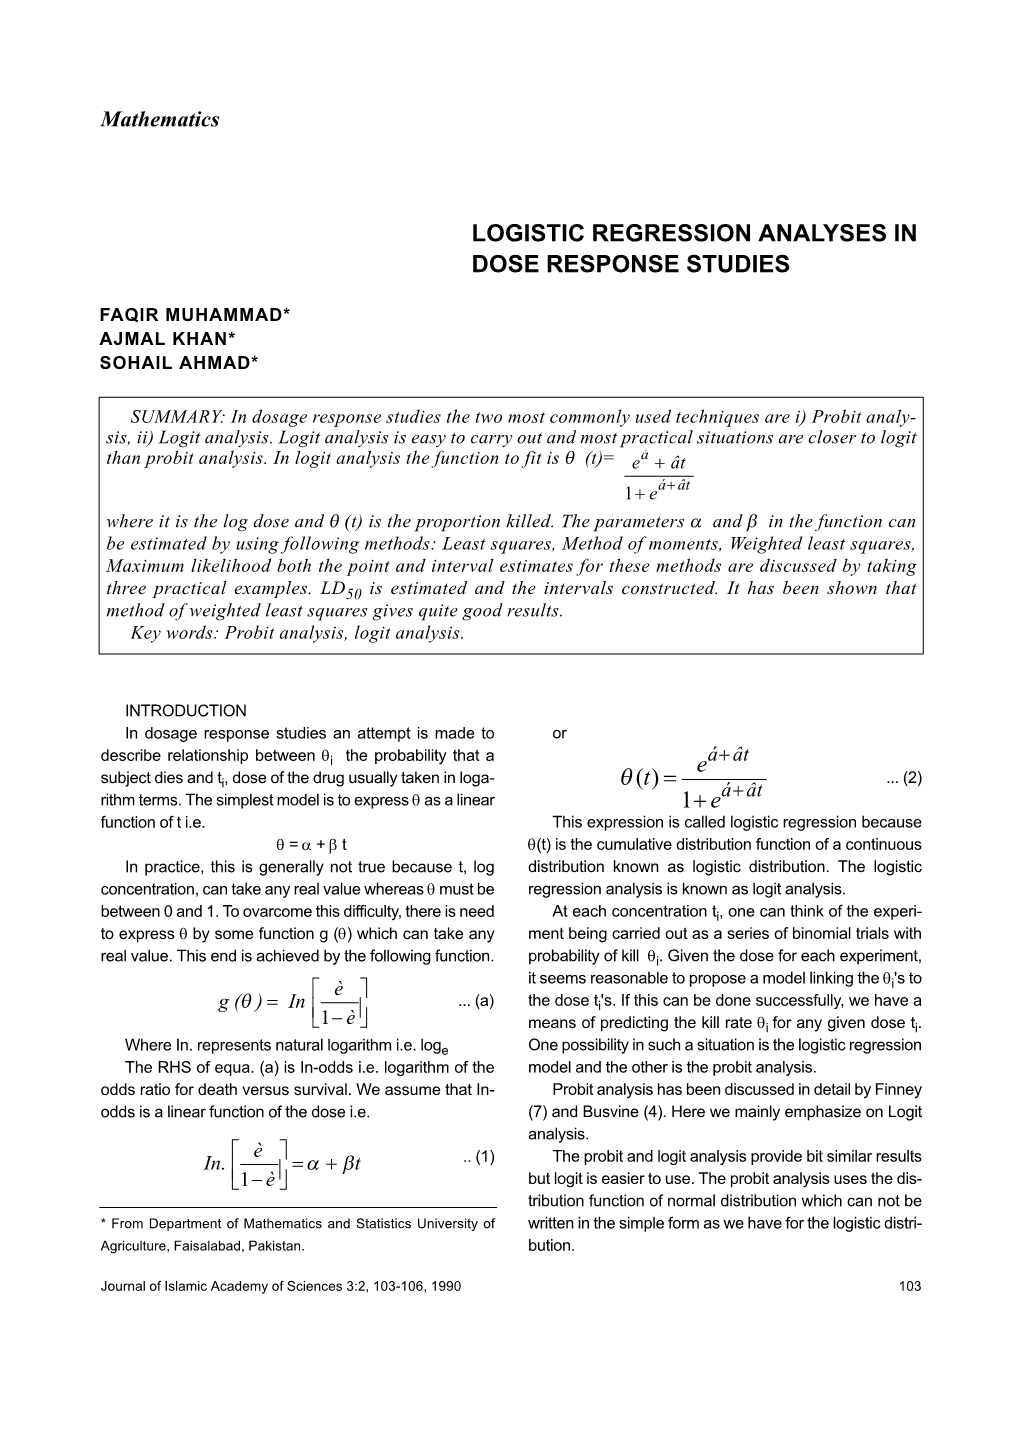 Logistic Regression Analyses in Dose Response Studies Θ